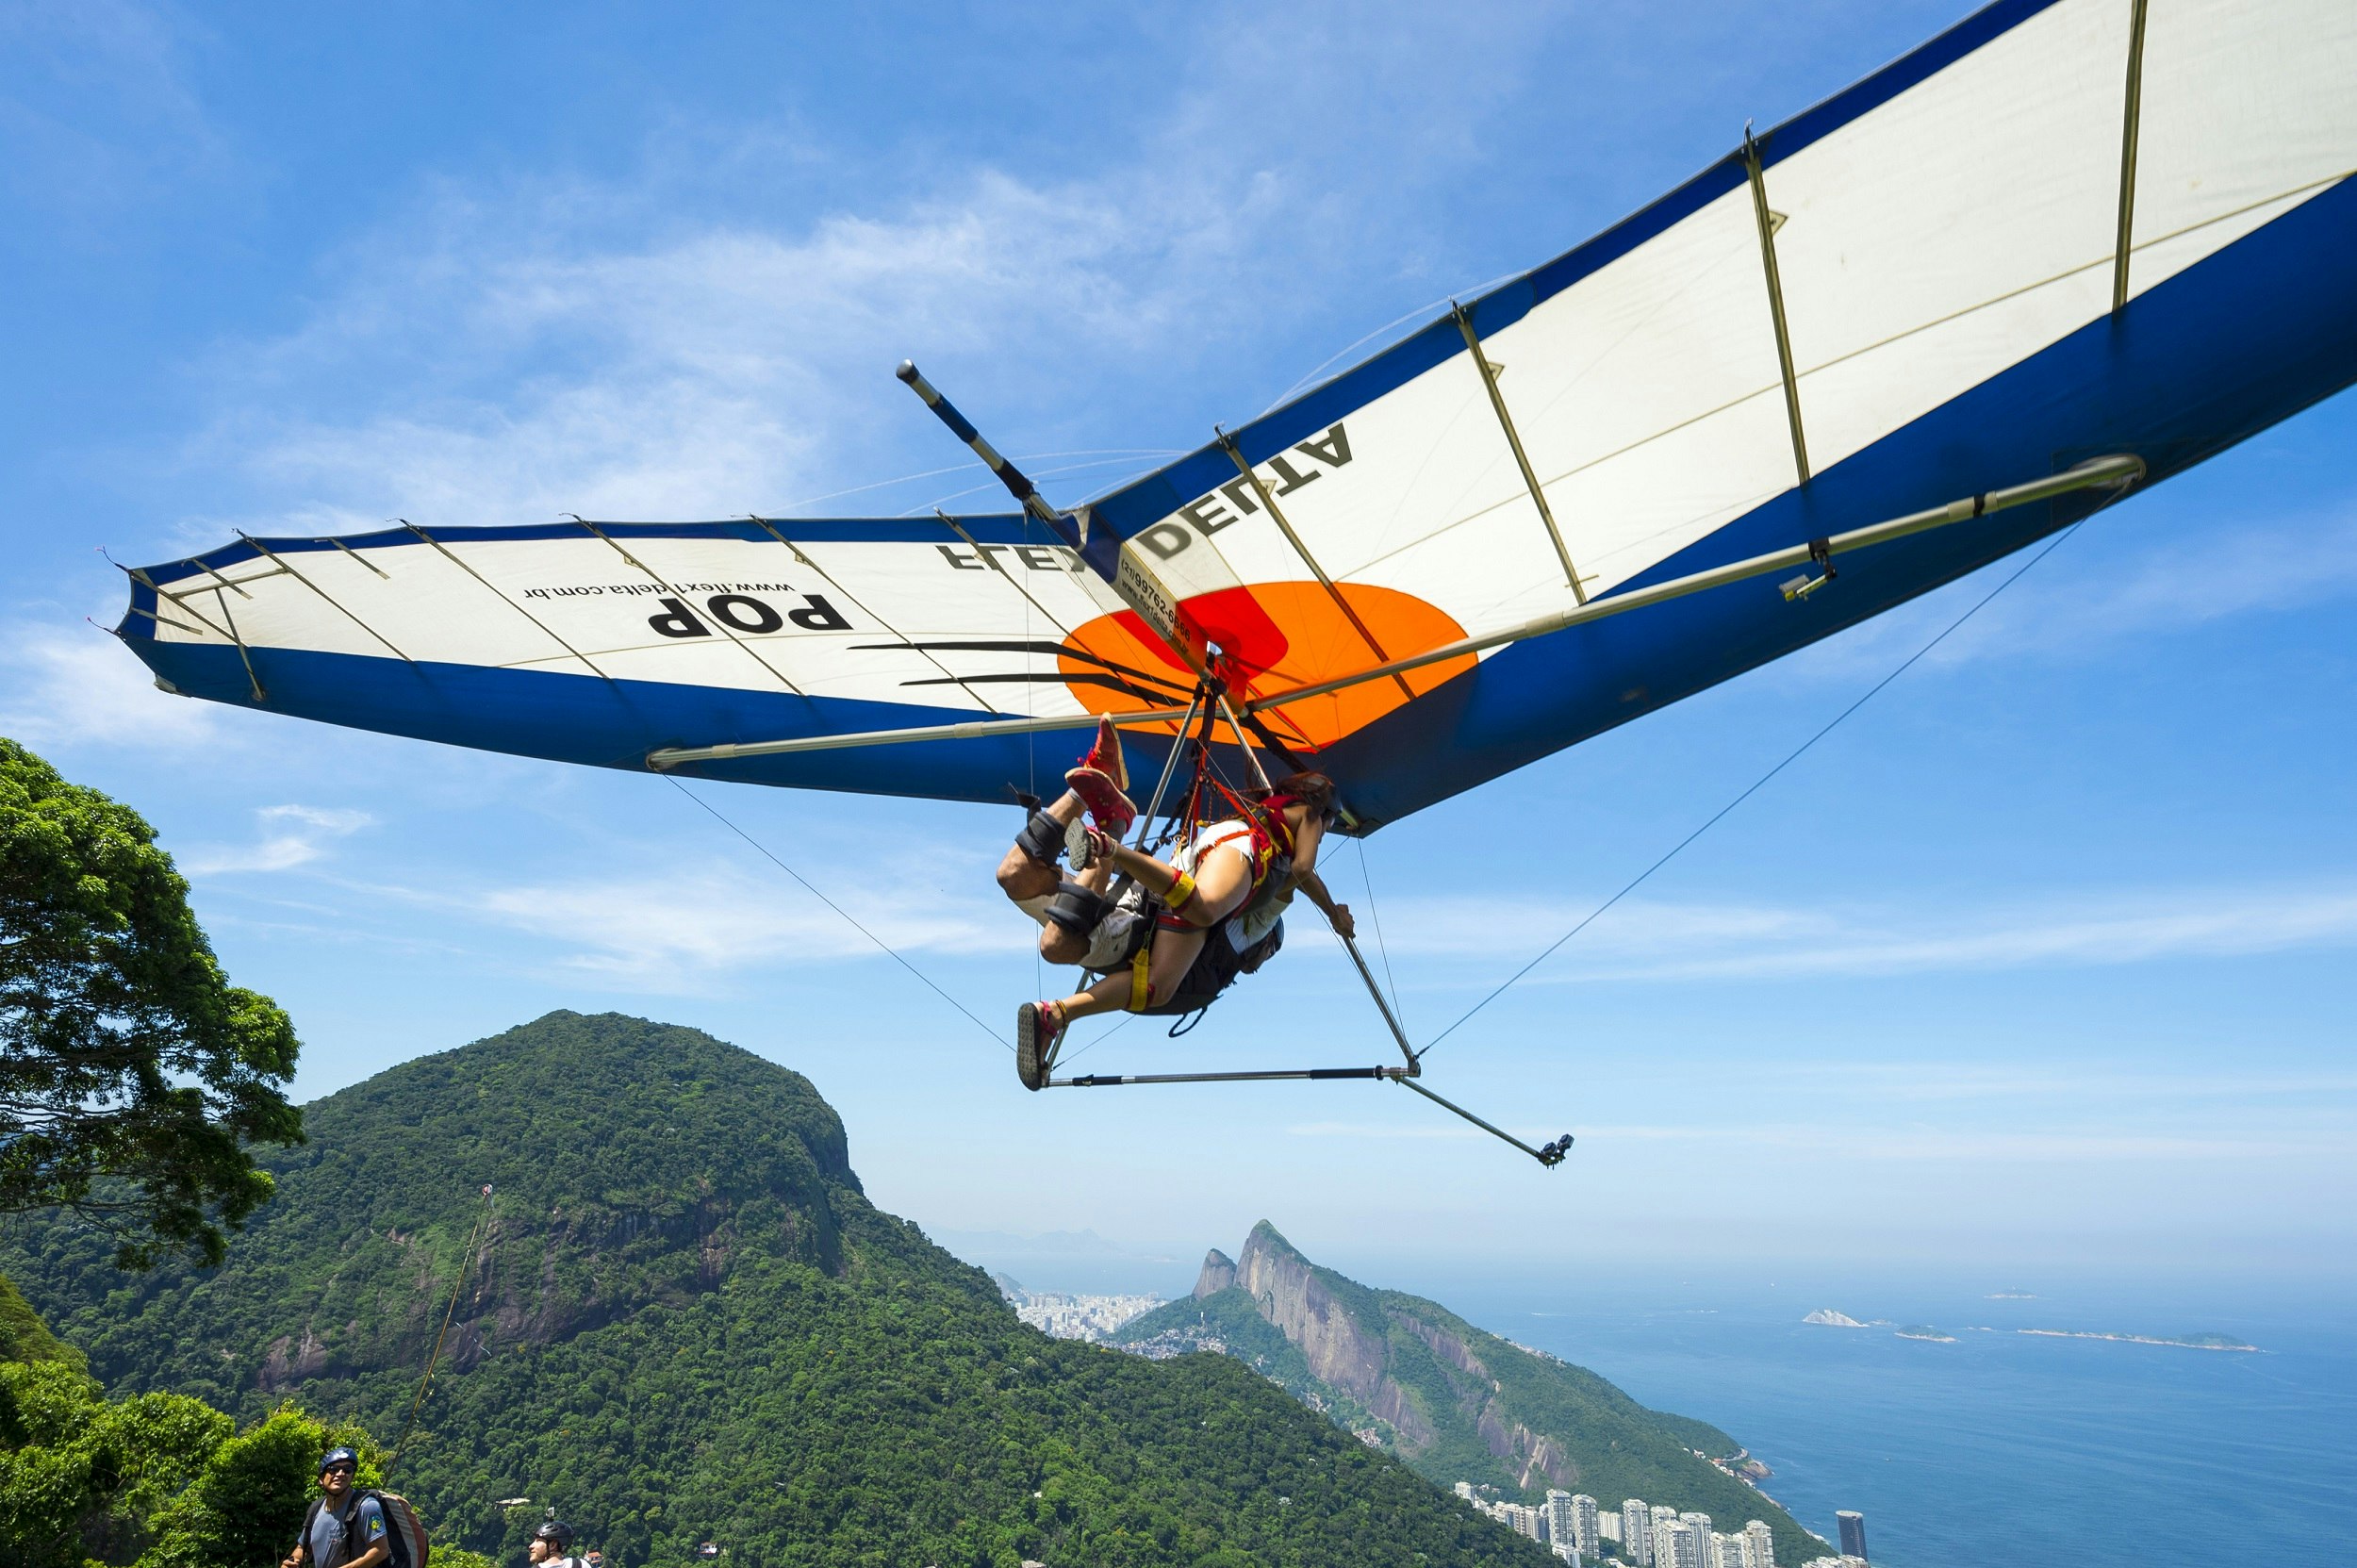 A hang gliding instructor takes off with a passenger from Pedra Bonita in the Tijuca National Forest; below them are forested hills and the distant buildings of Rio.